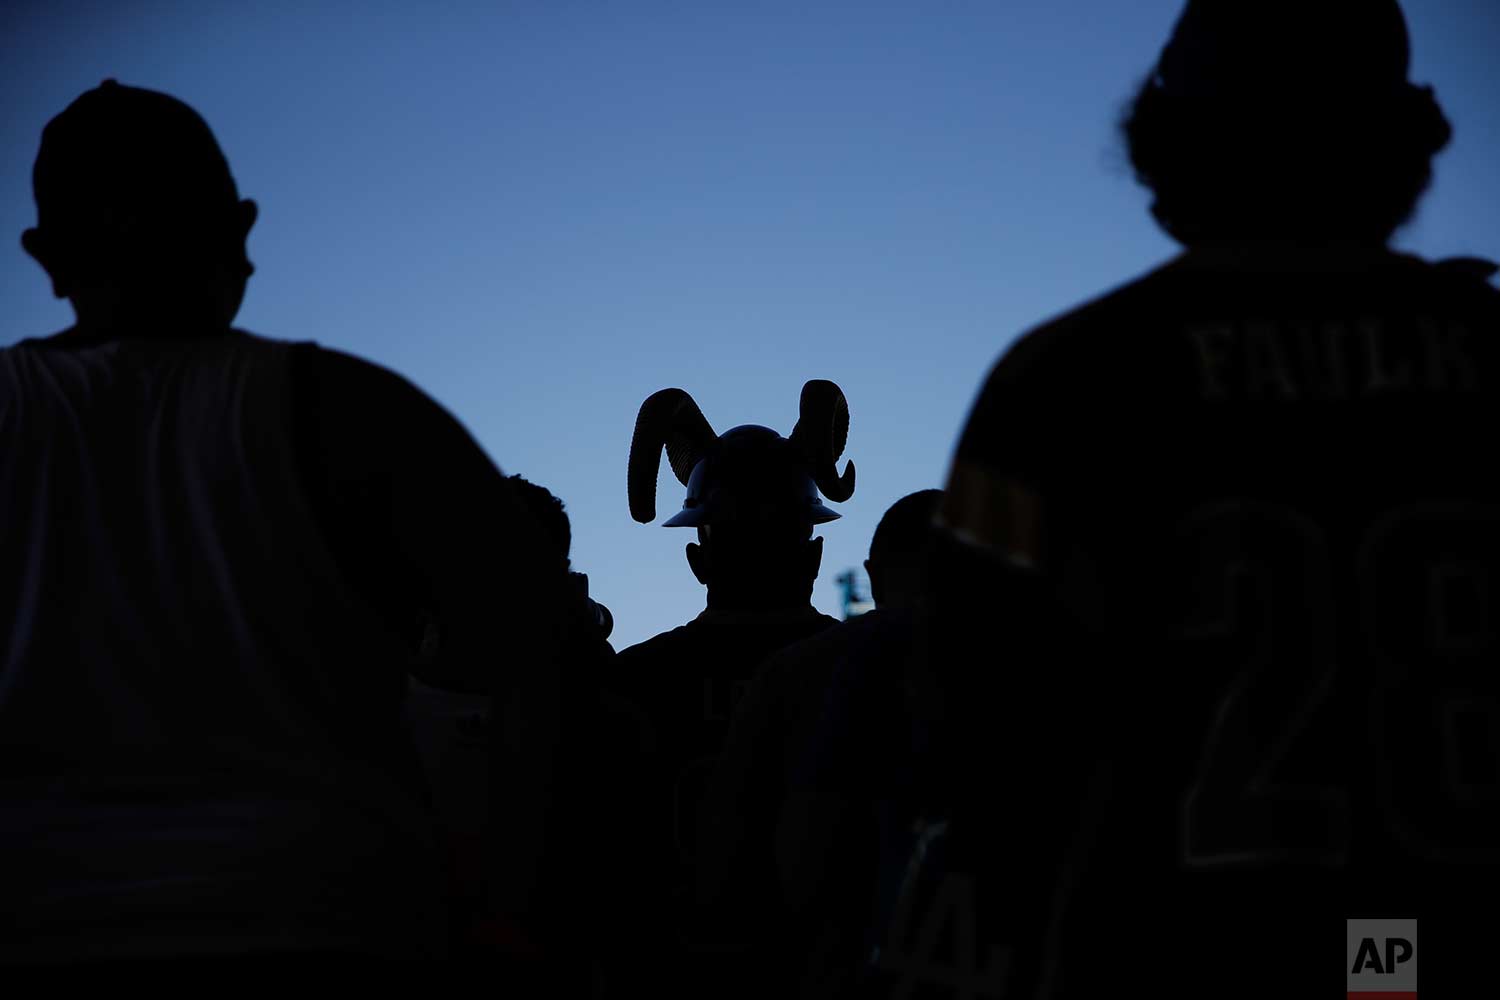  Fans watch the Los Angeles Rams practice at NFL football training camp in Irvine, Calif., on Saturday, July 29, 2017. (AP Photo/Jae C. Hong) 